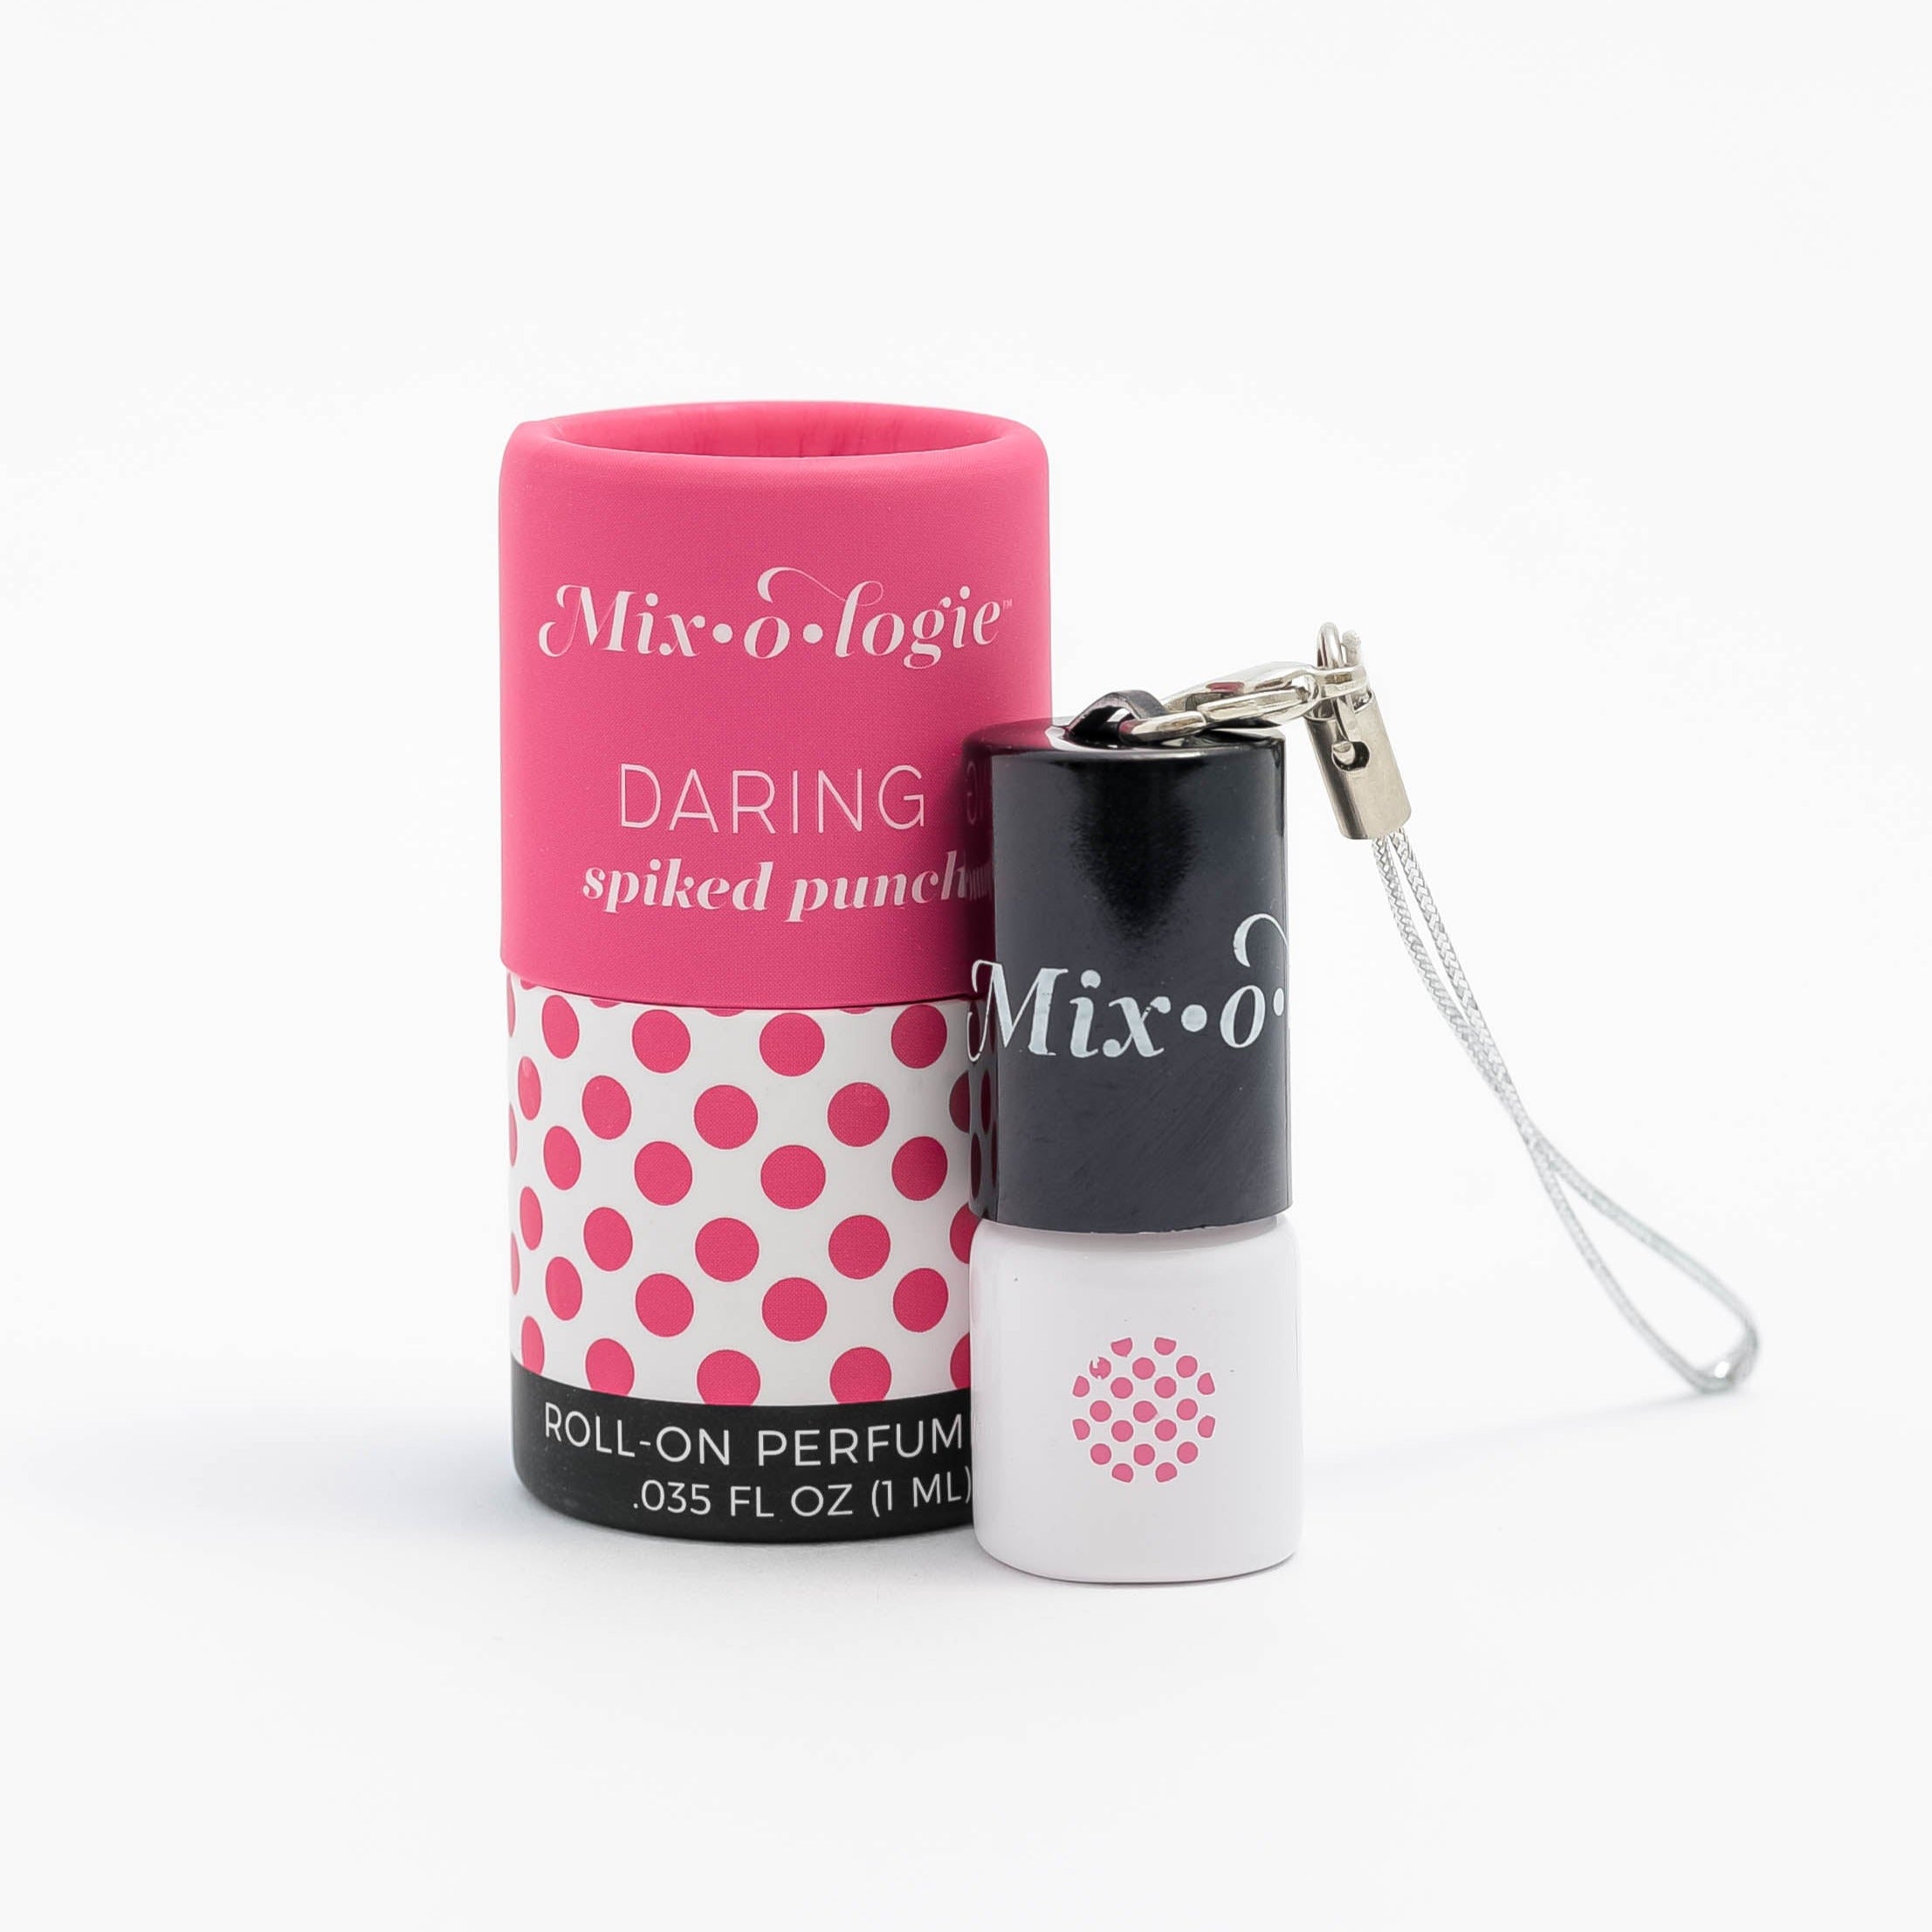 Daring (Spiked Punch) mini white cylinder rollerballs with black top and keychain attachment with bright pink polka dots has .035 fl oz or 1 mL. Bright pink cylinder packing tube with bright pink polka dots. Roll-on perfume oil. Mini rollerball and cylinder tube are pictured on a white background.